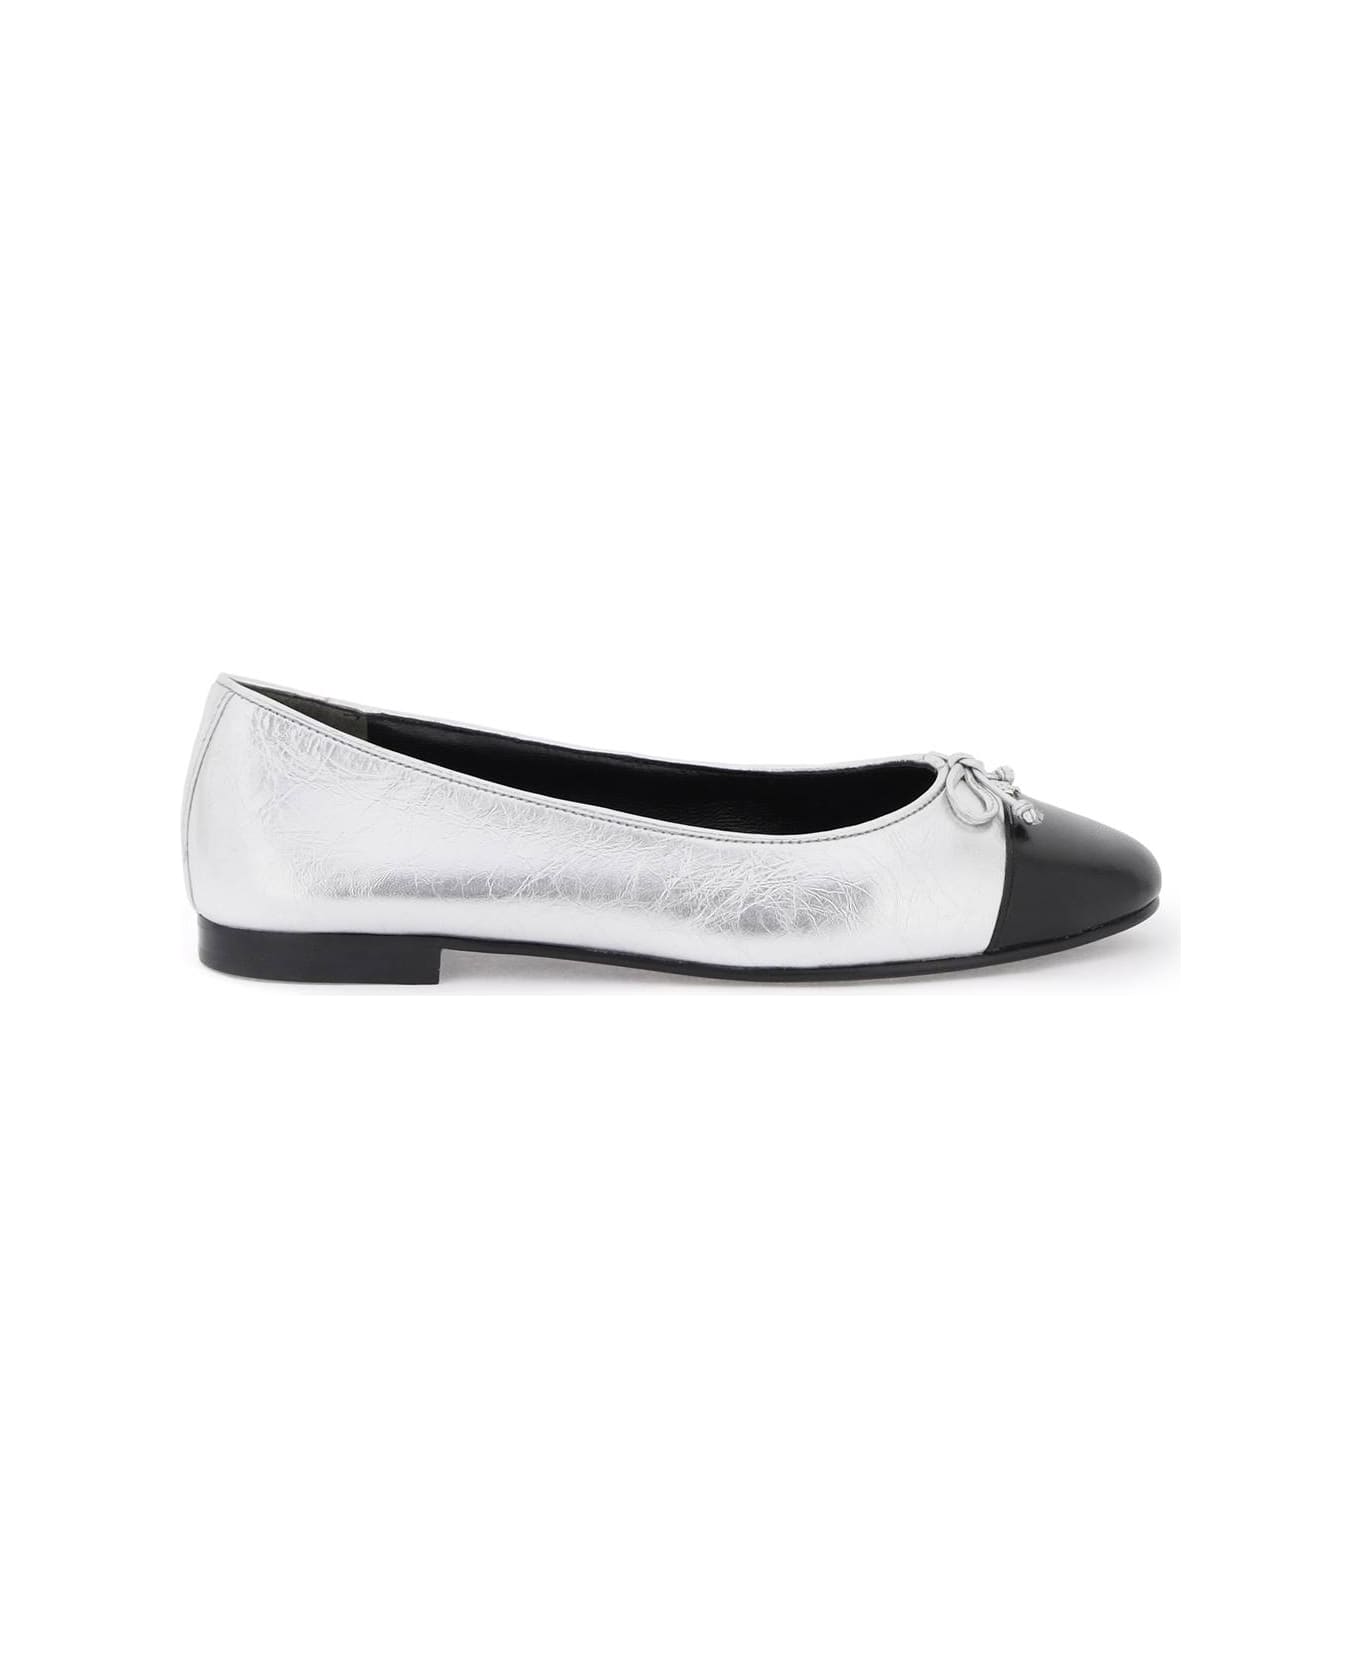 Tory Burch Laminated Ballet Flats With Contrasting Toe - Silver/Black